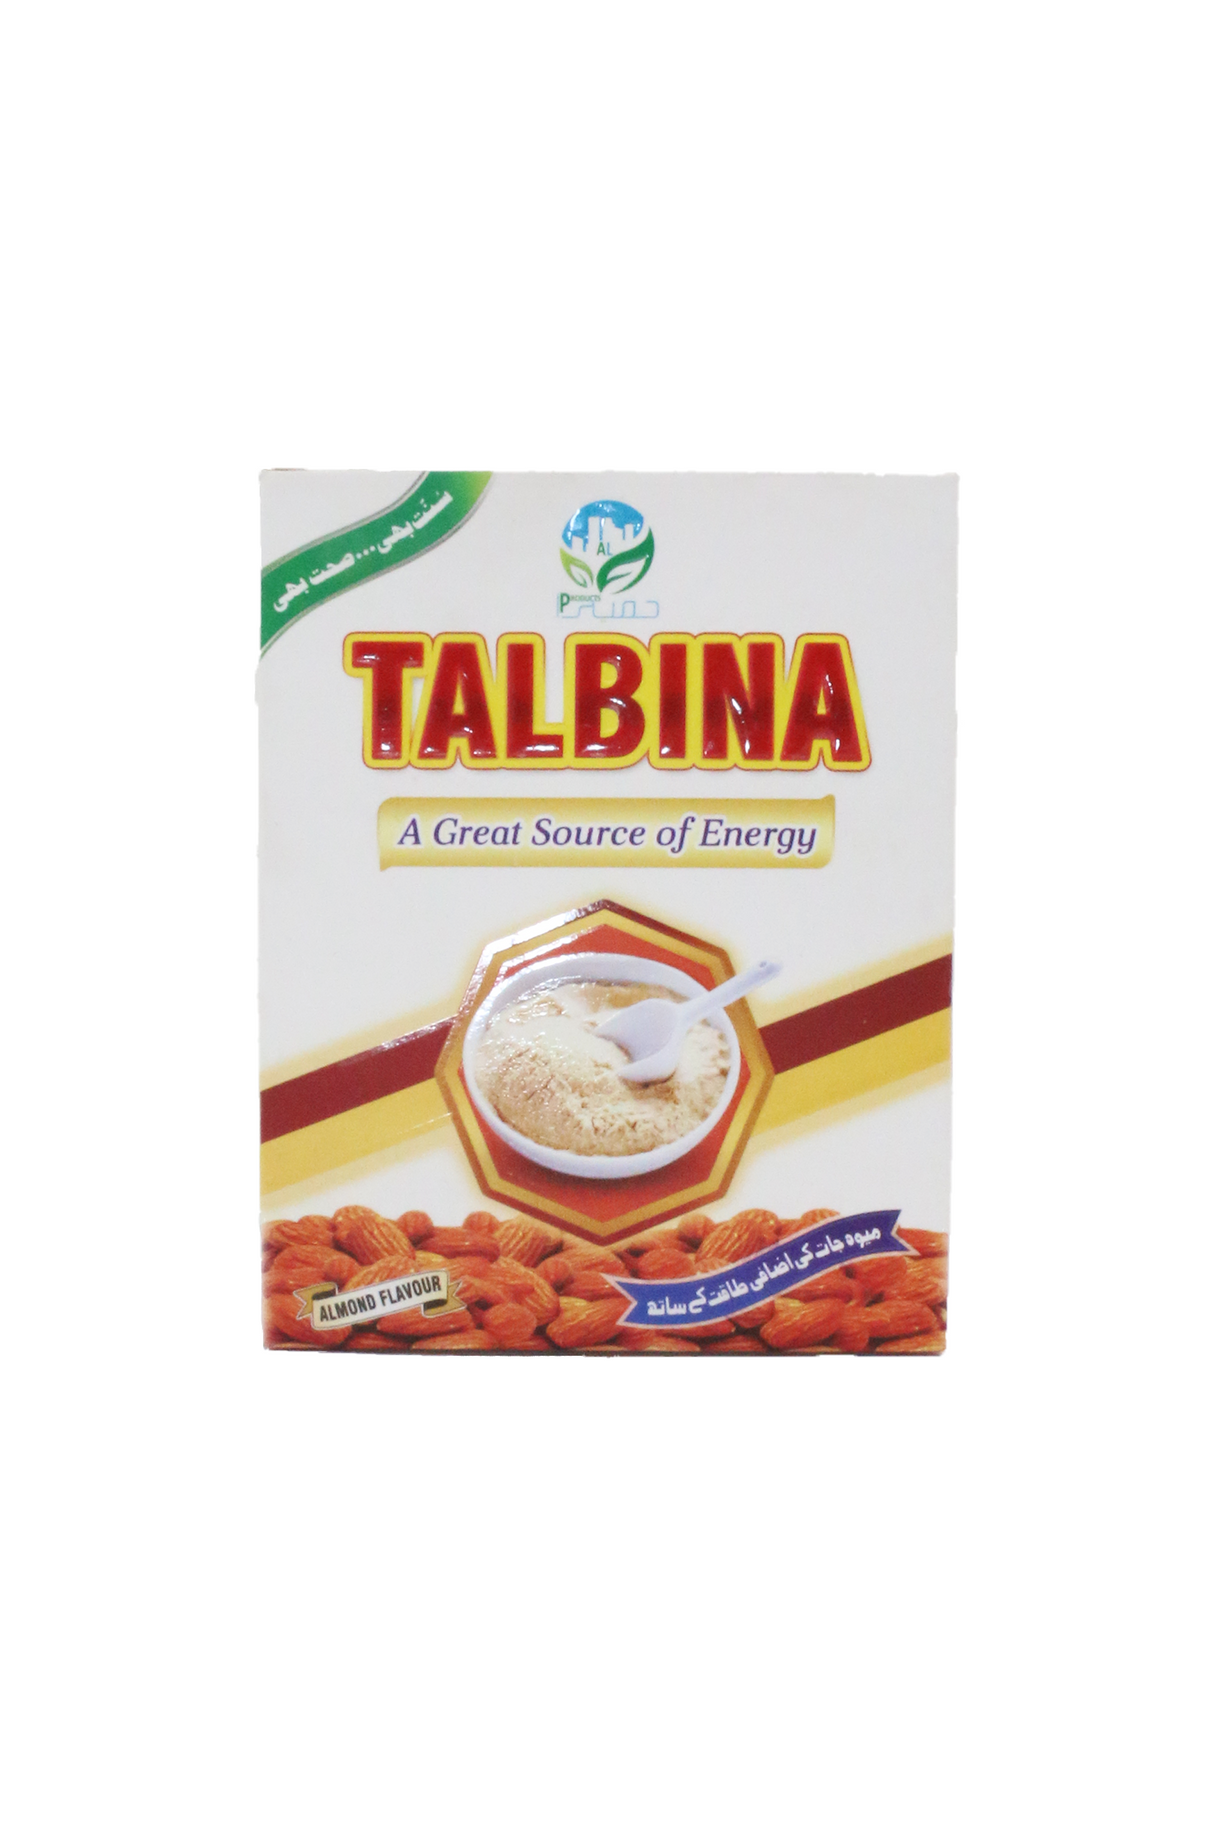 talbina cereal almond flavour 200g